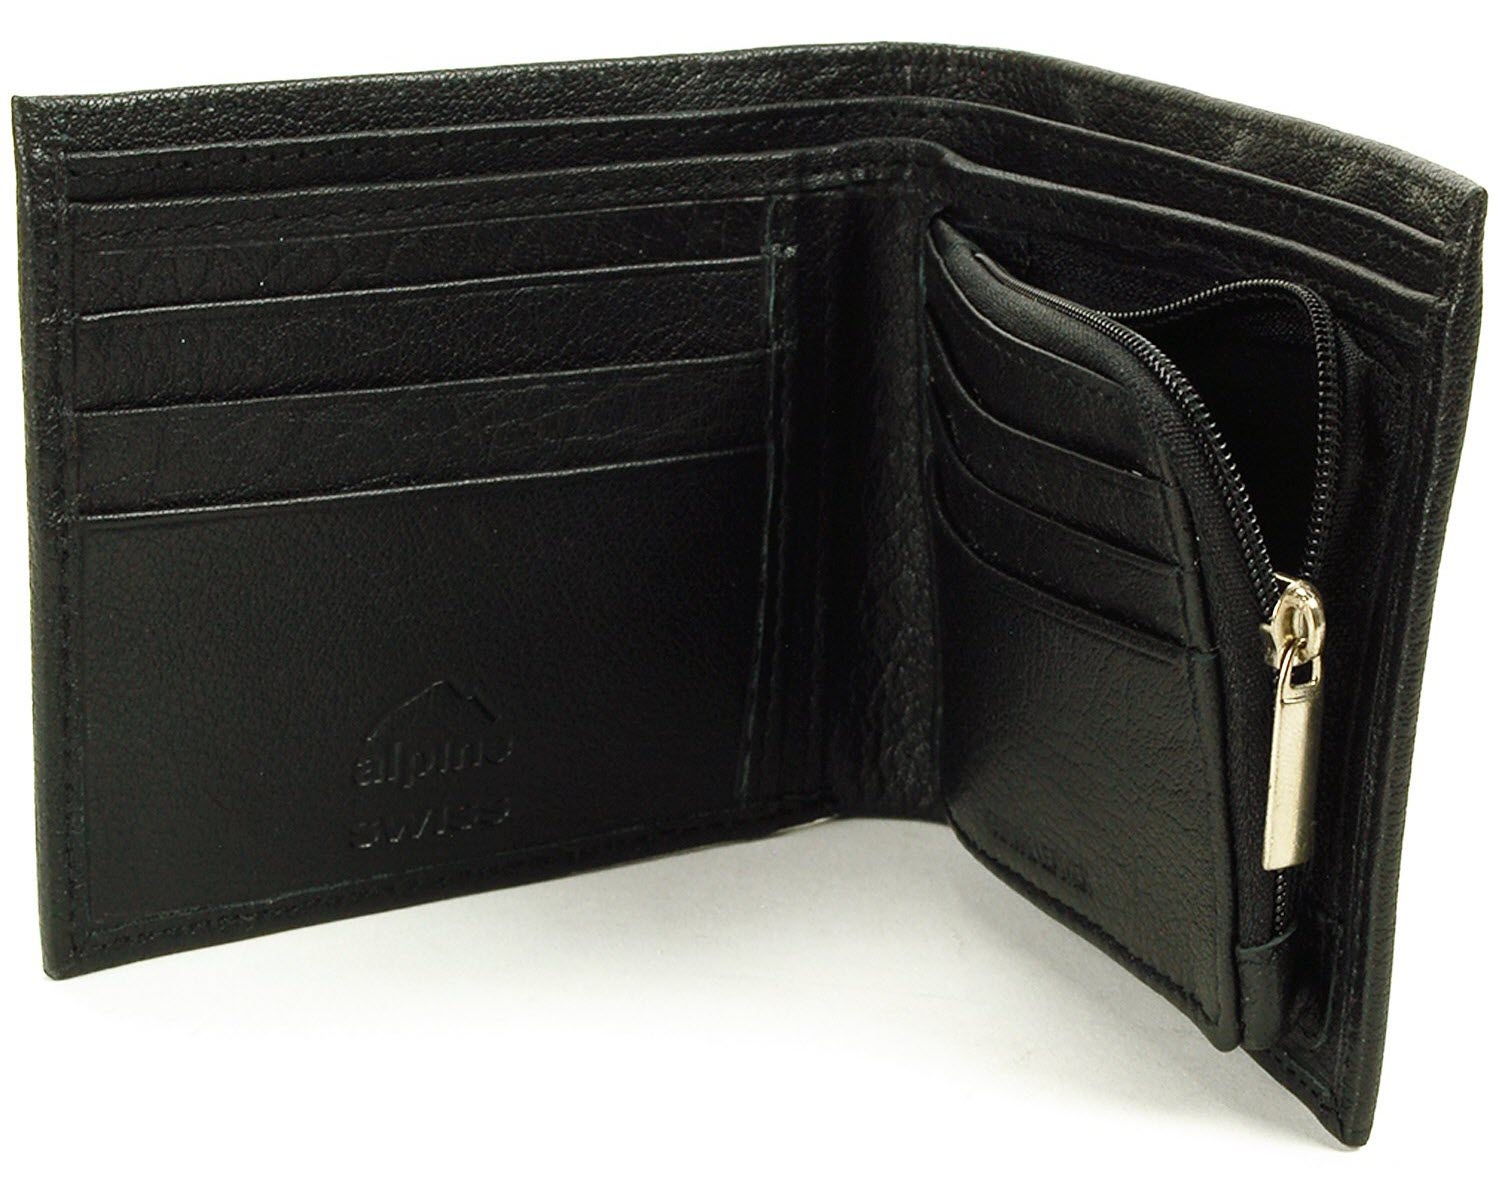 15+ Best Men’s Wallet with Coin Pocket for 2020